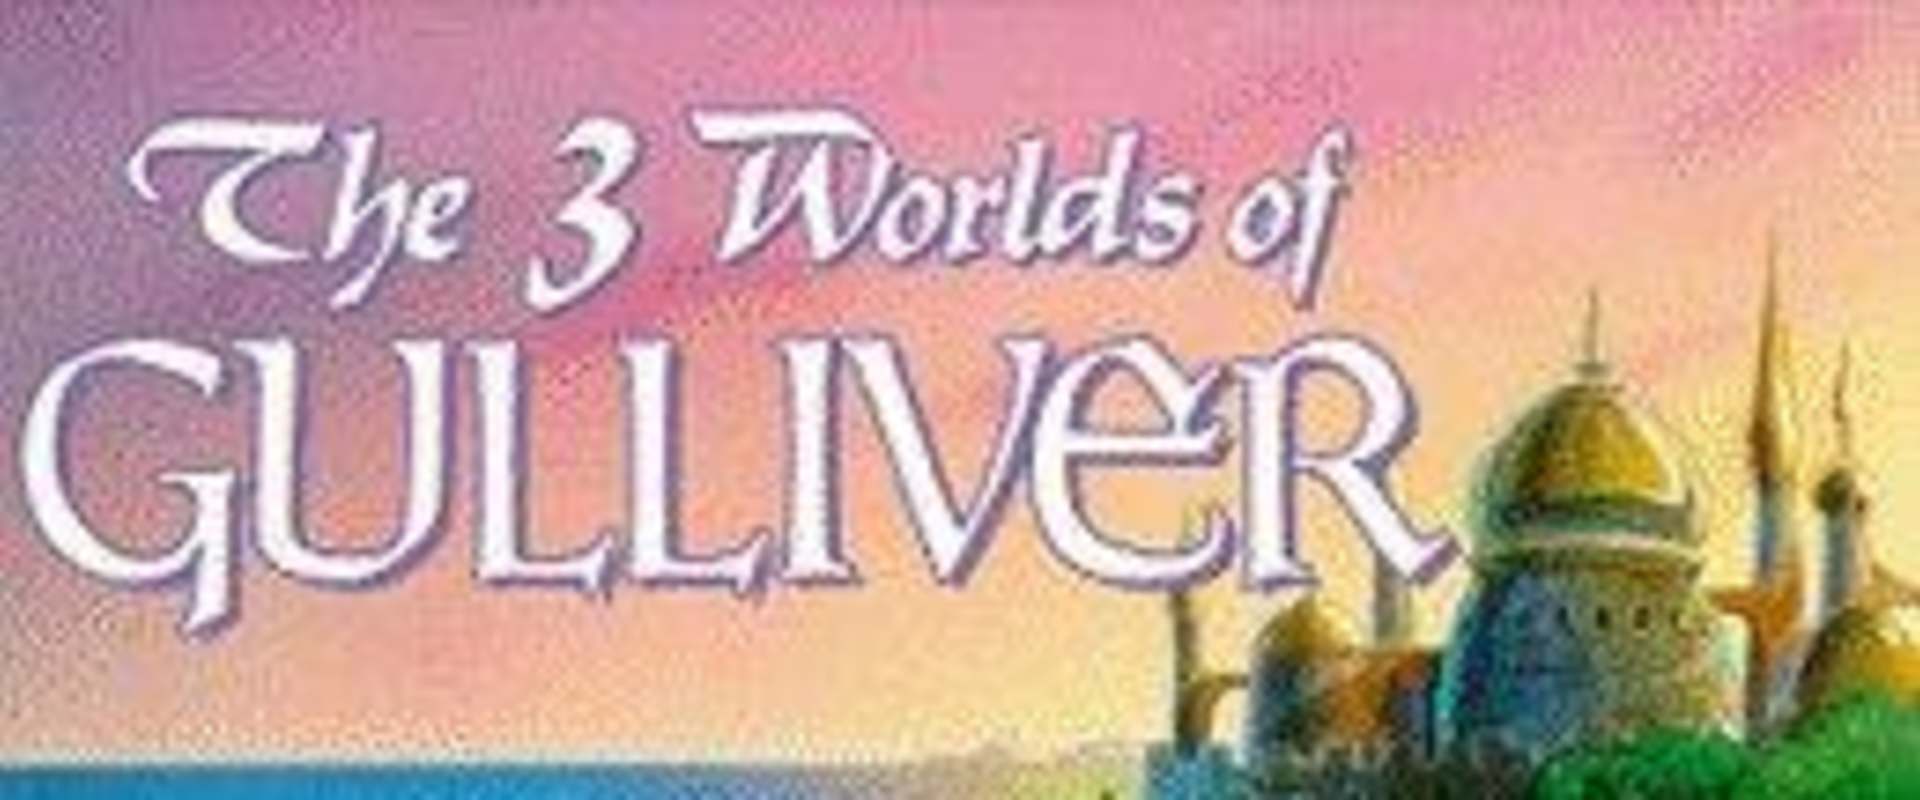 The 3 Worlds of Gulliver background 1